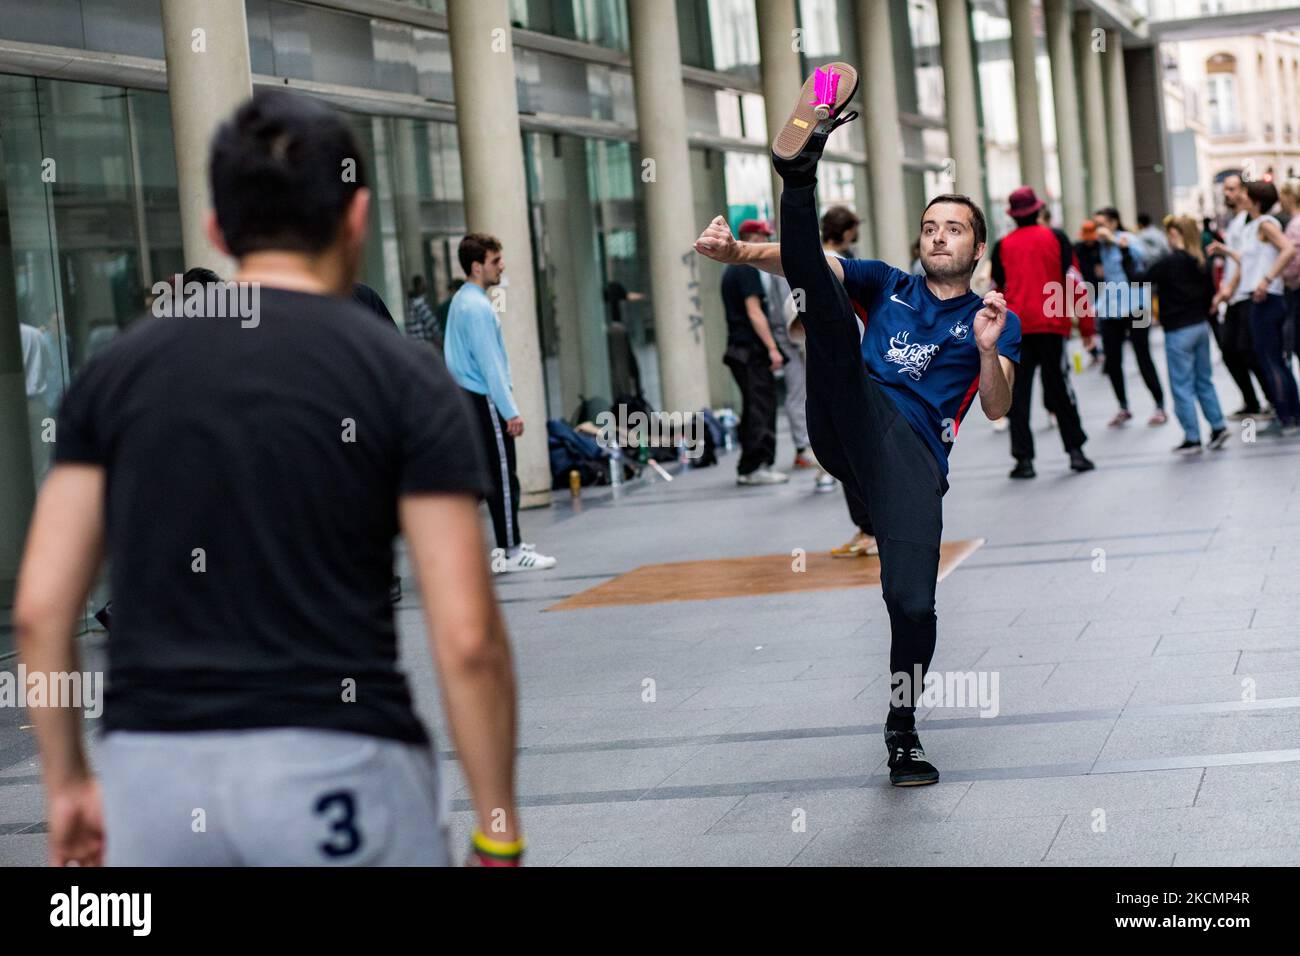 Paris, France on 23 May 2021. Frederic Viana Gomes, a Plumfoot player makes a smash during a freestyle session at the Passage des Jacobins. To date, 4 clubs are active in France: Dunkerque, Paris, Puteaux and Marseille, with about 150 members. Stock Photo